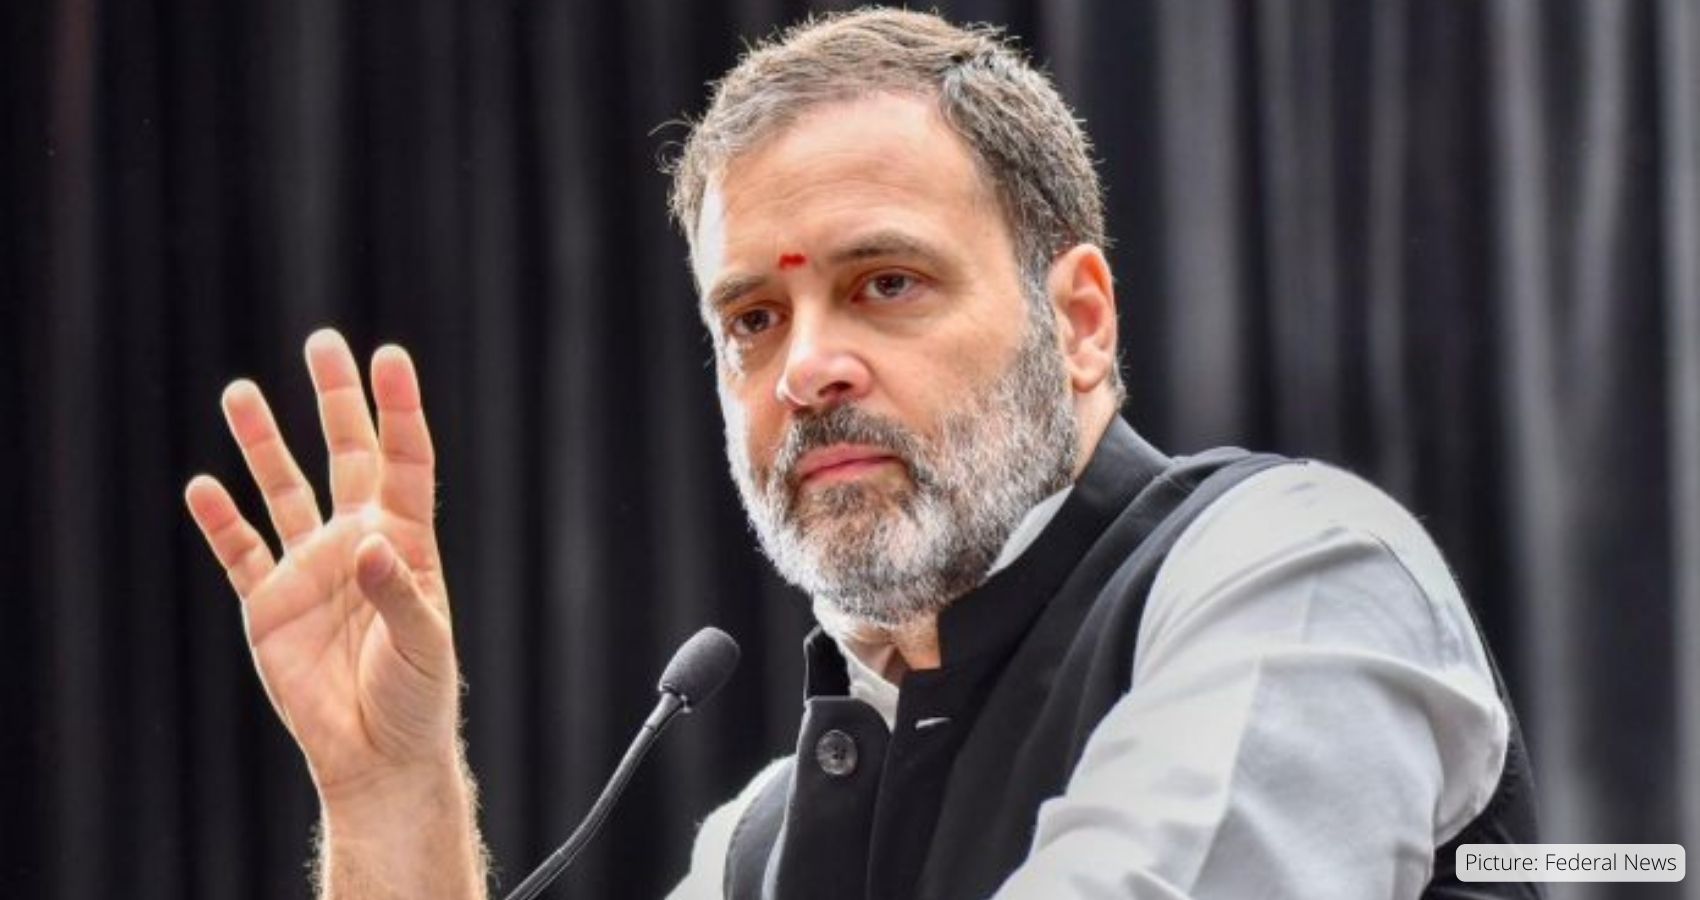 Rahul Gandhi Claims PM Modi Believes He’s Wiser Than God at US Event